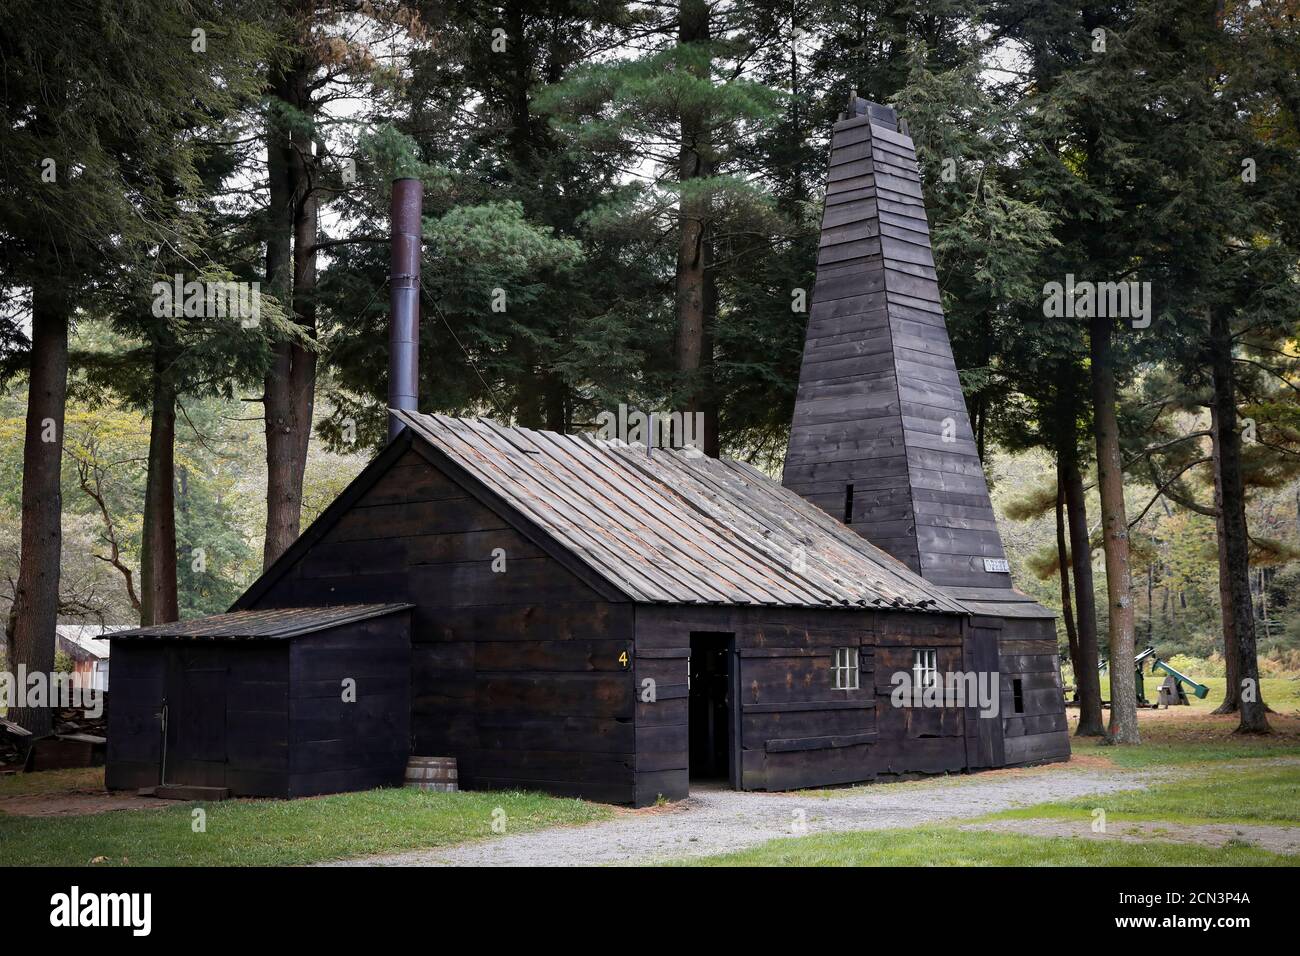 An exact replica of Edwin Drake's engine house and derrick that encloses the original 1859 well that launched the modern petroleum industry at the Drake Well Museum and Park in Titusville, Pennsylvania U.S., October 5, 2017. REUTERS/Brendan McDermid Stock Photo